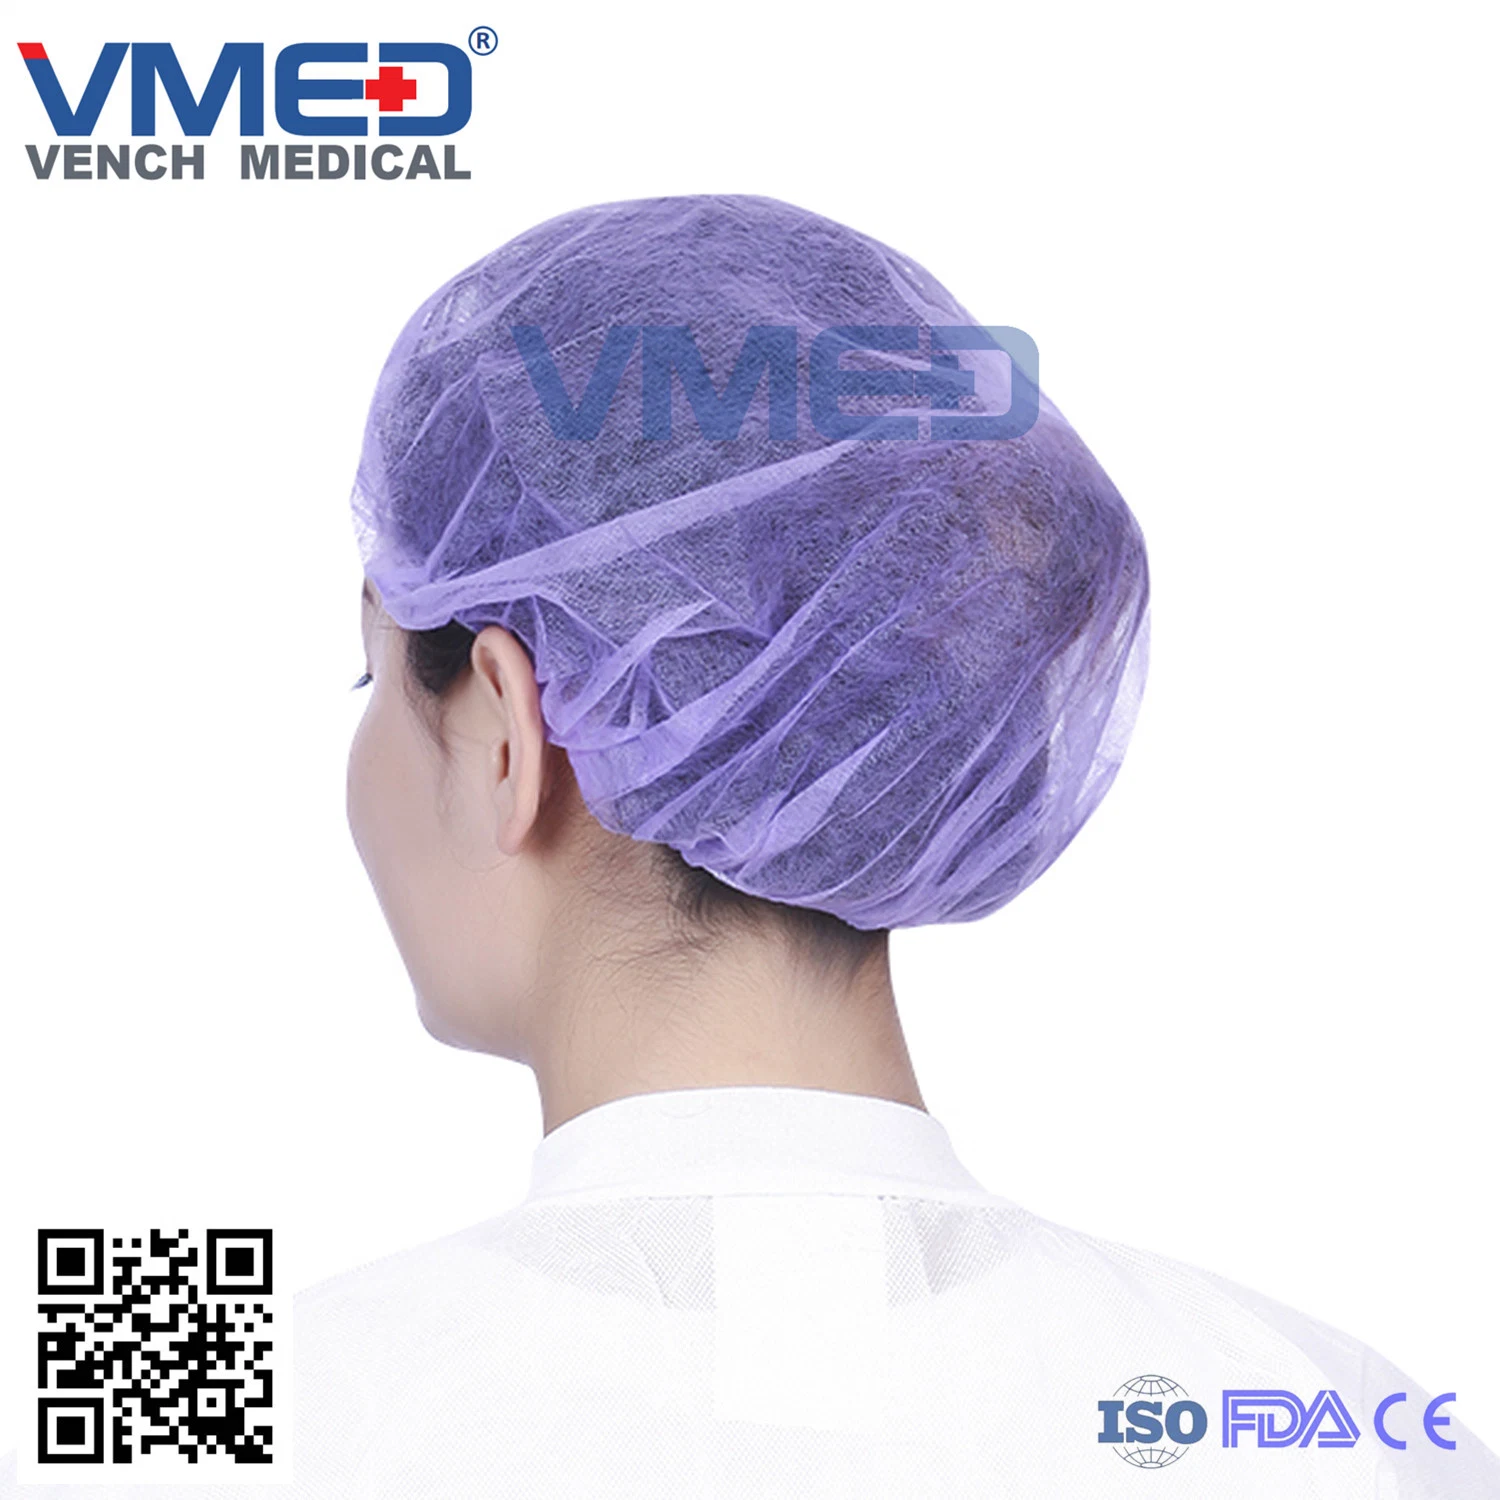 Non-Wovenbouffant/Nurse/ Mob/Clip/Crimped/Pleated/Strip/Shower/Chef/Nurse/Doctor/Surgical/Round/Hospital/Medical/Dental/Disposable Cap